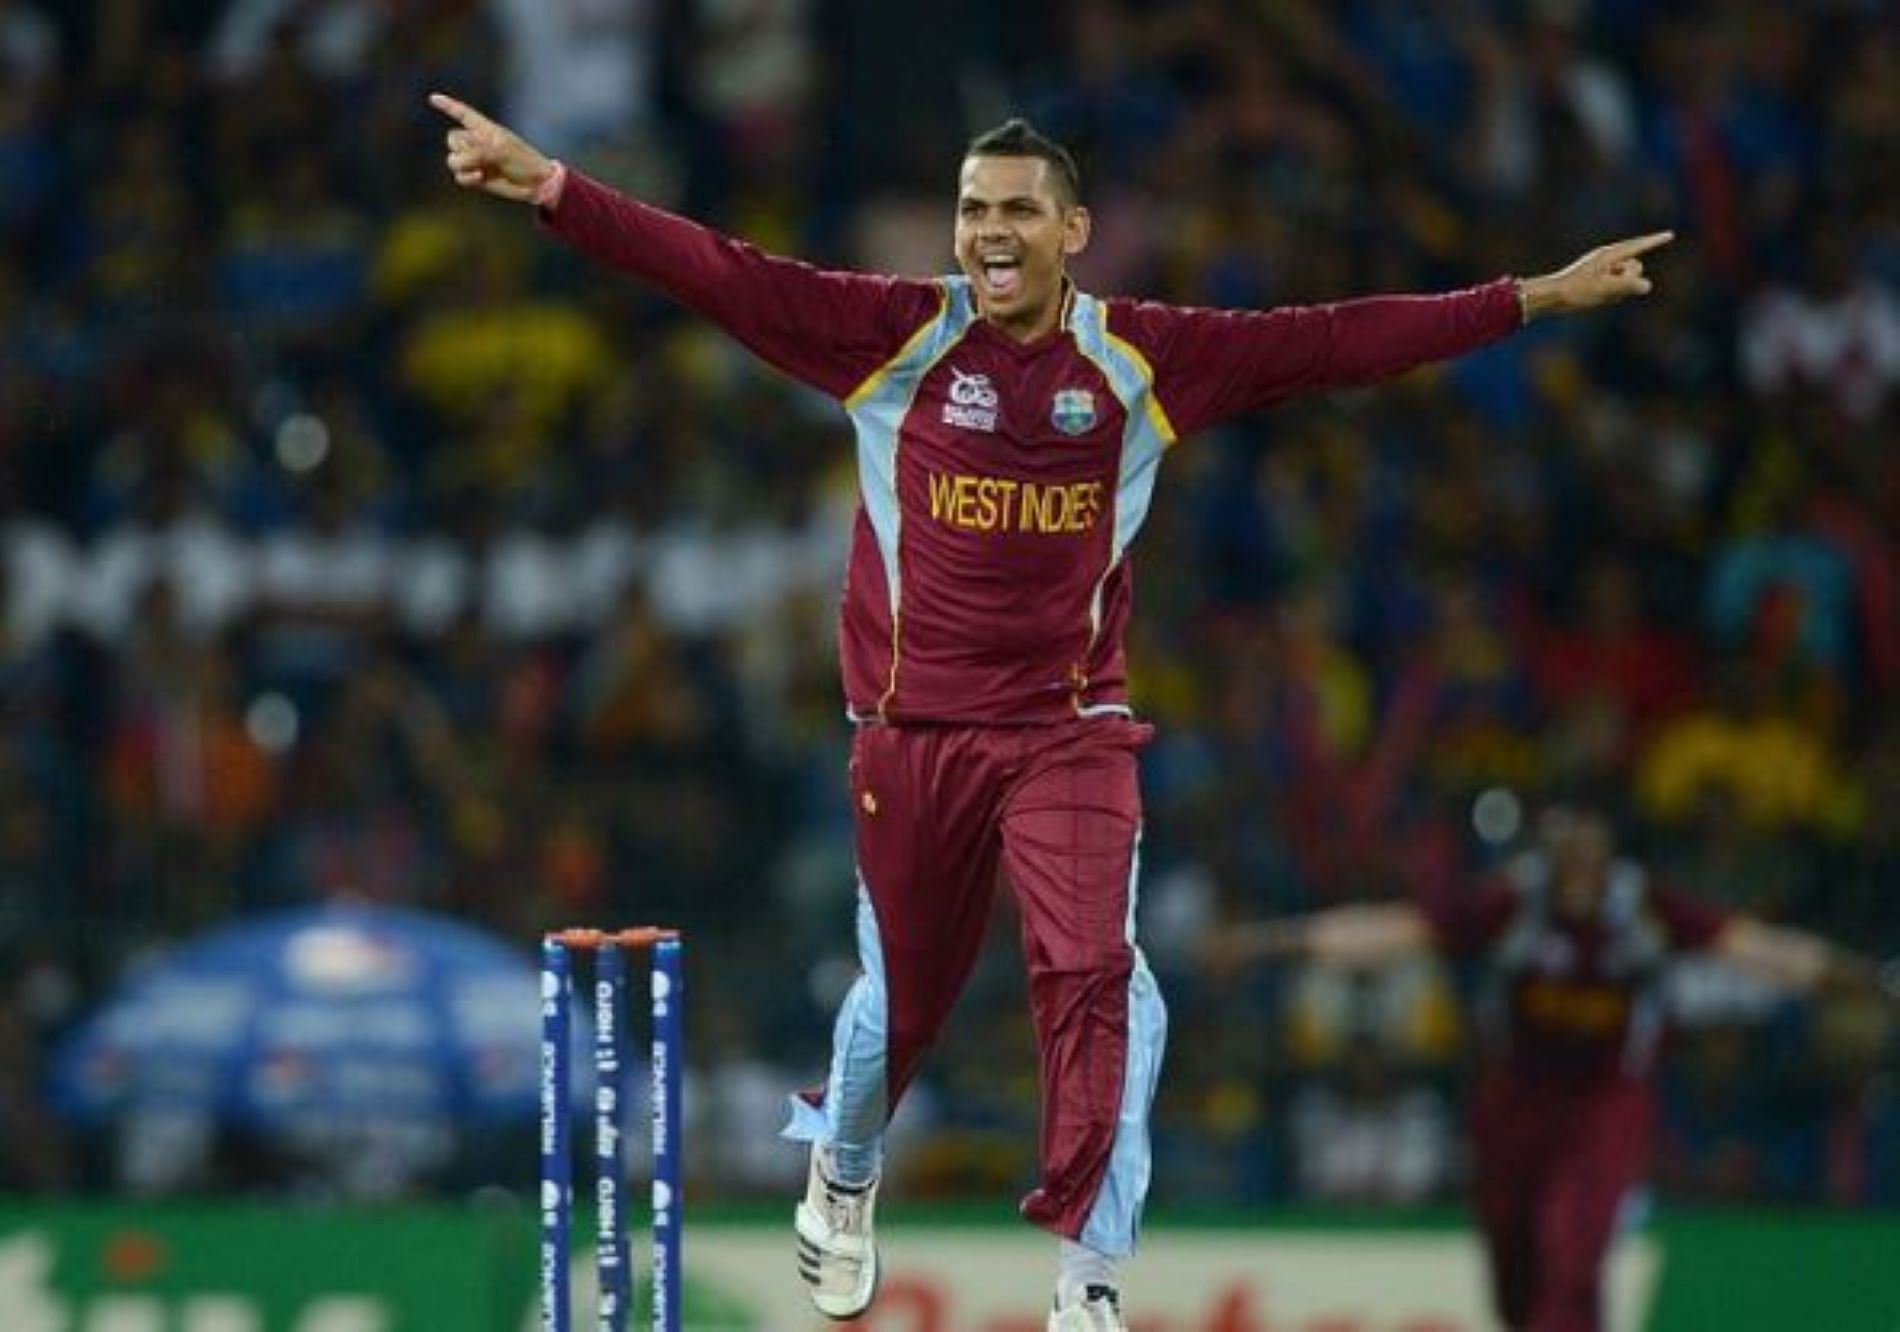 Narine last played for the West Indies four years back